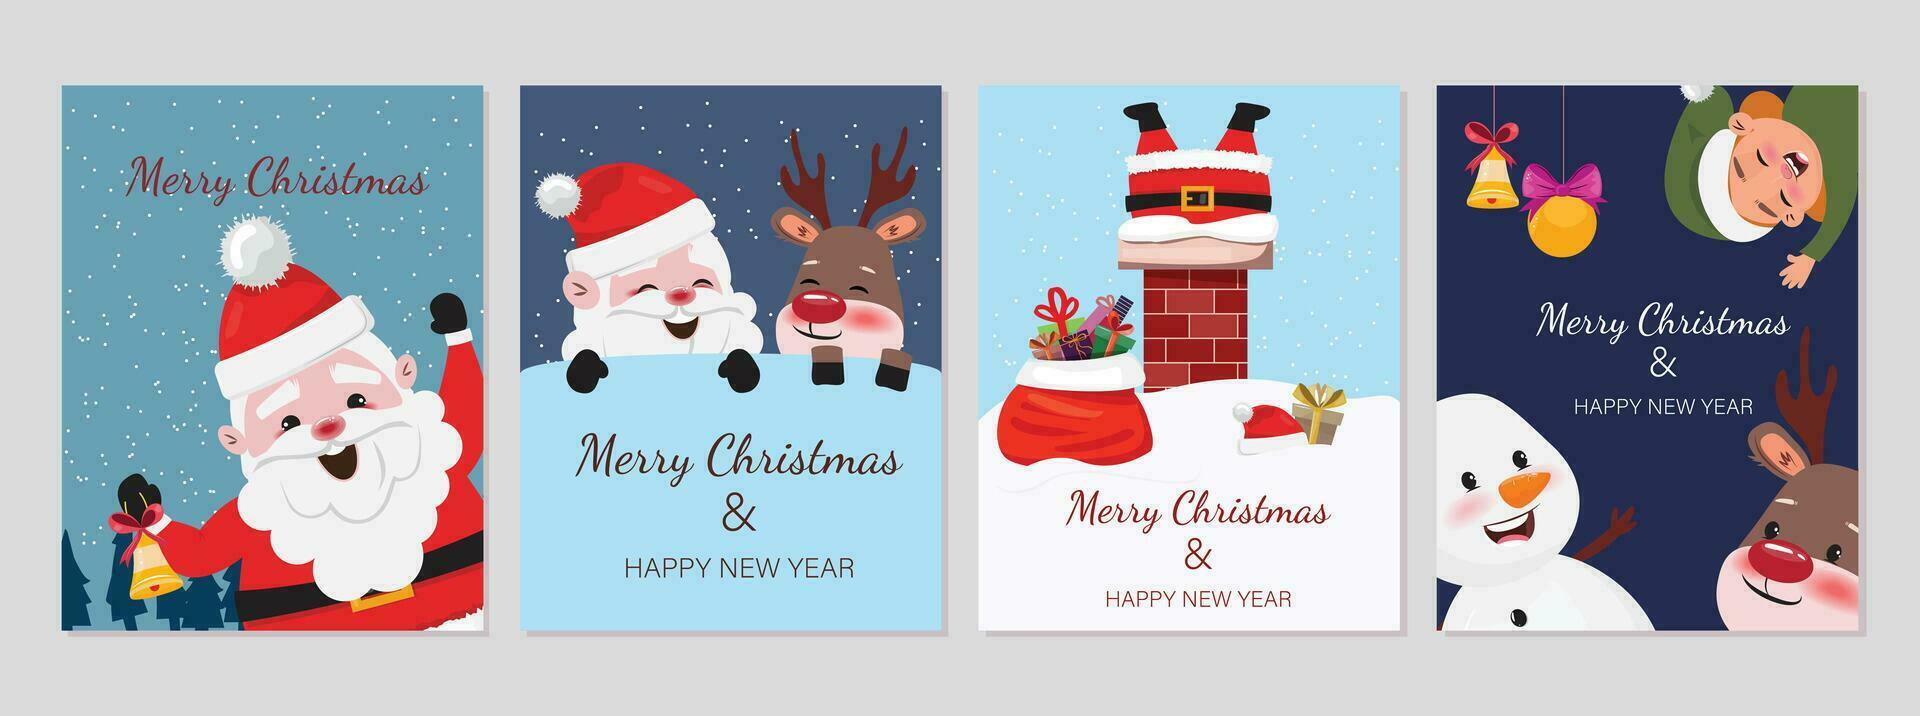 Set of Christmas cards with Christmas characters vector